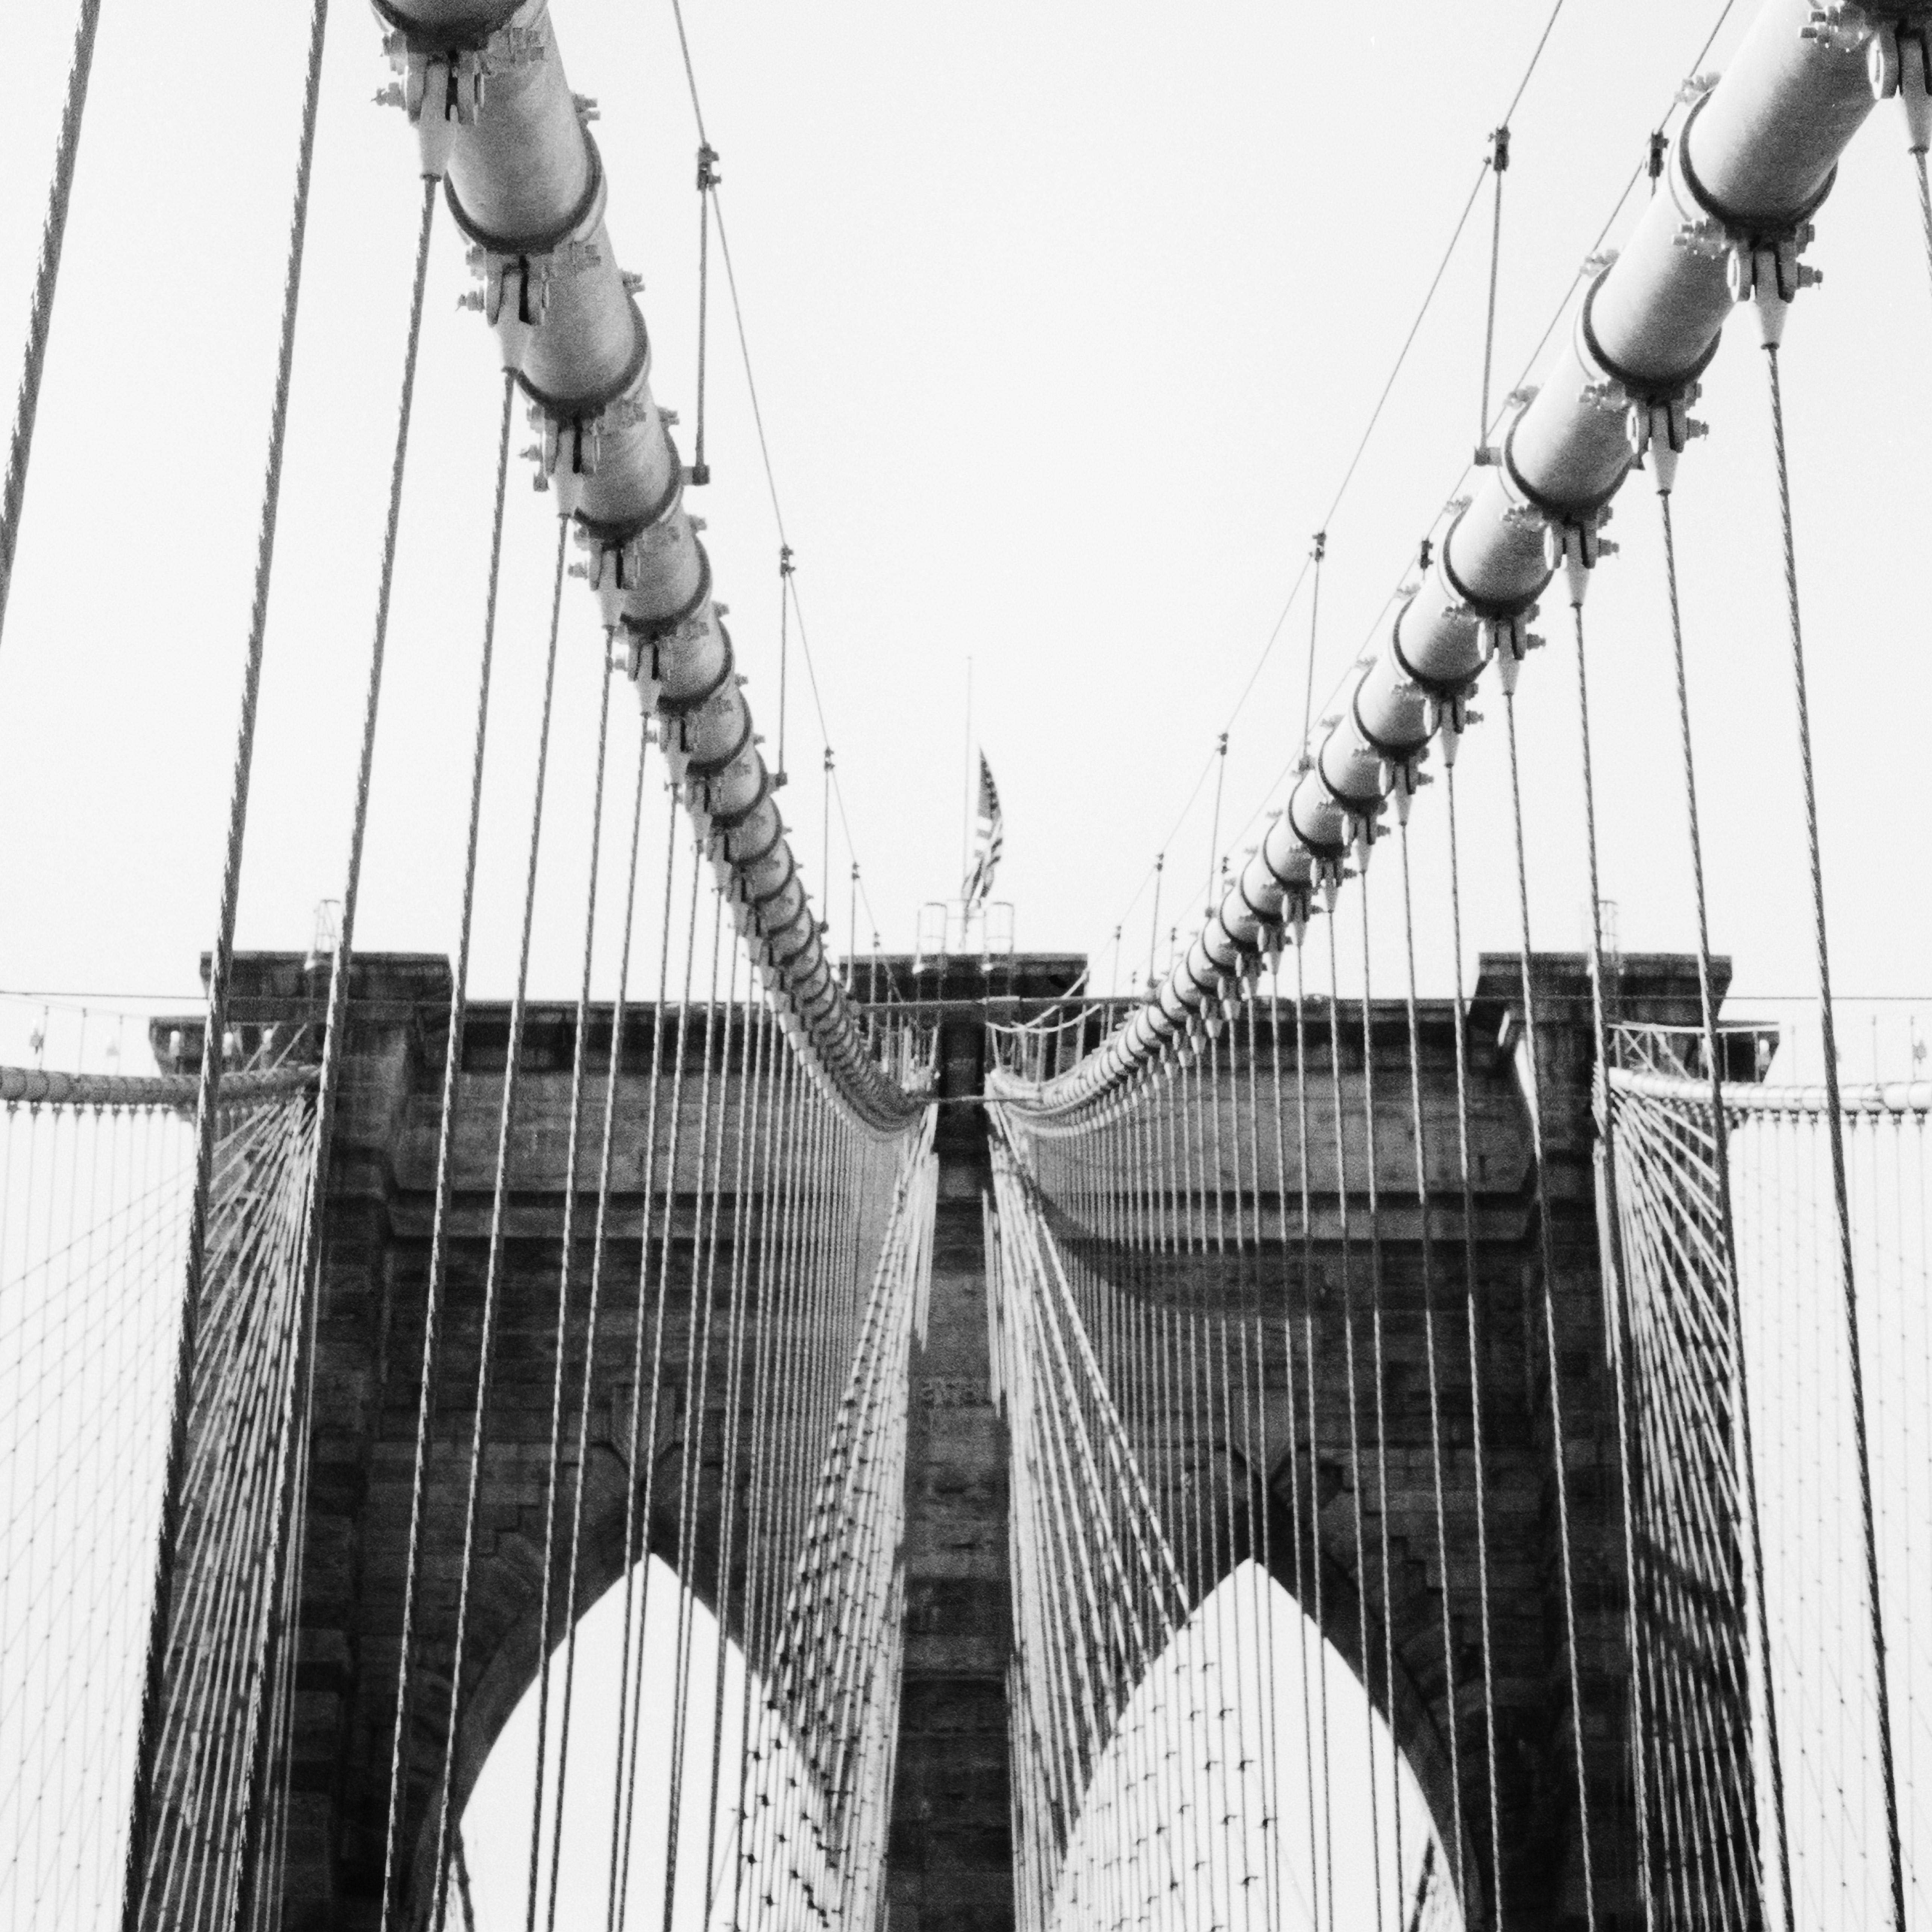 Brooklyn Bridge, archtecture detail, New York, USA, black white cityscape print - Photograph by Gerald Berghammer